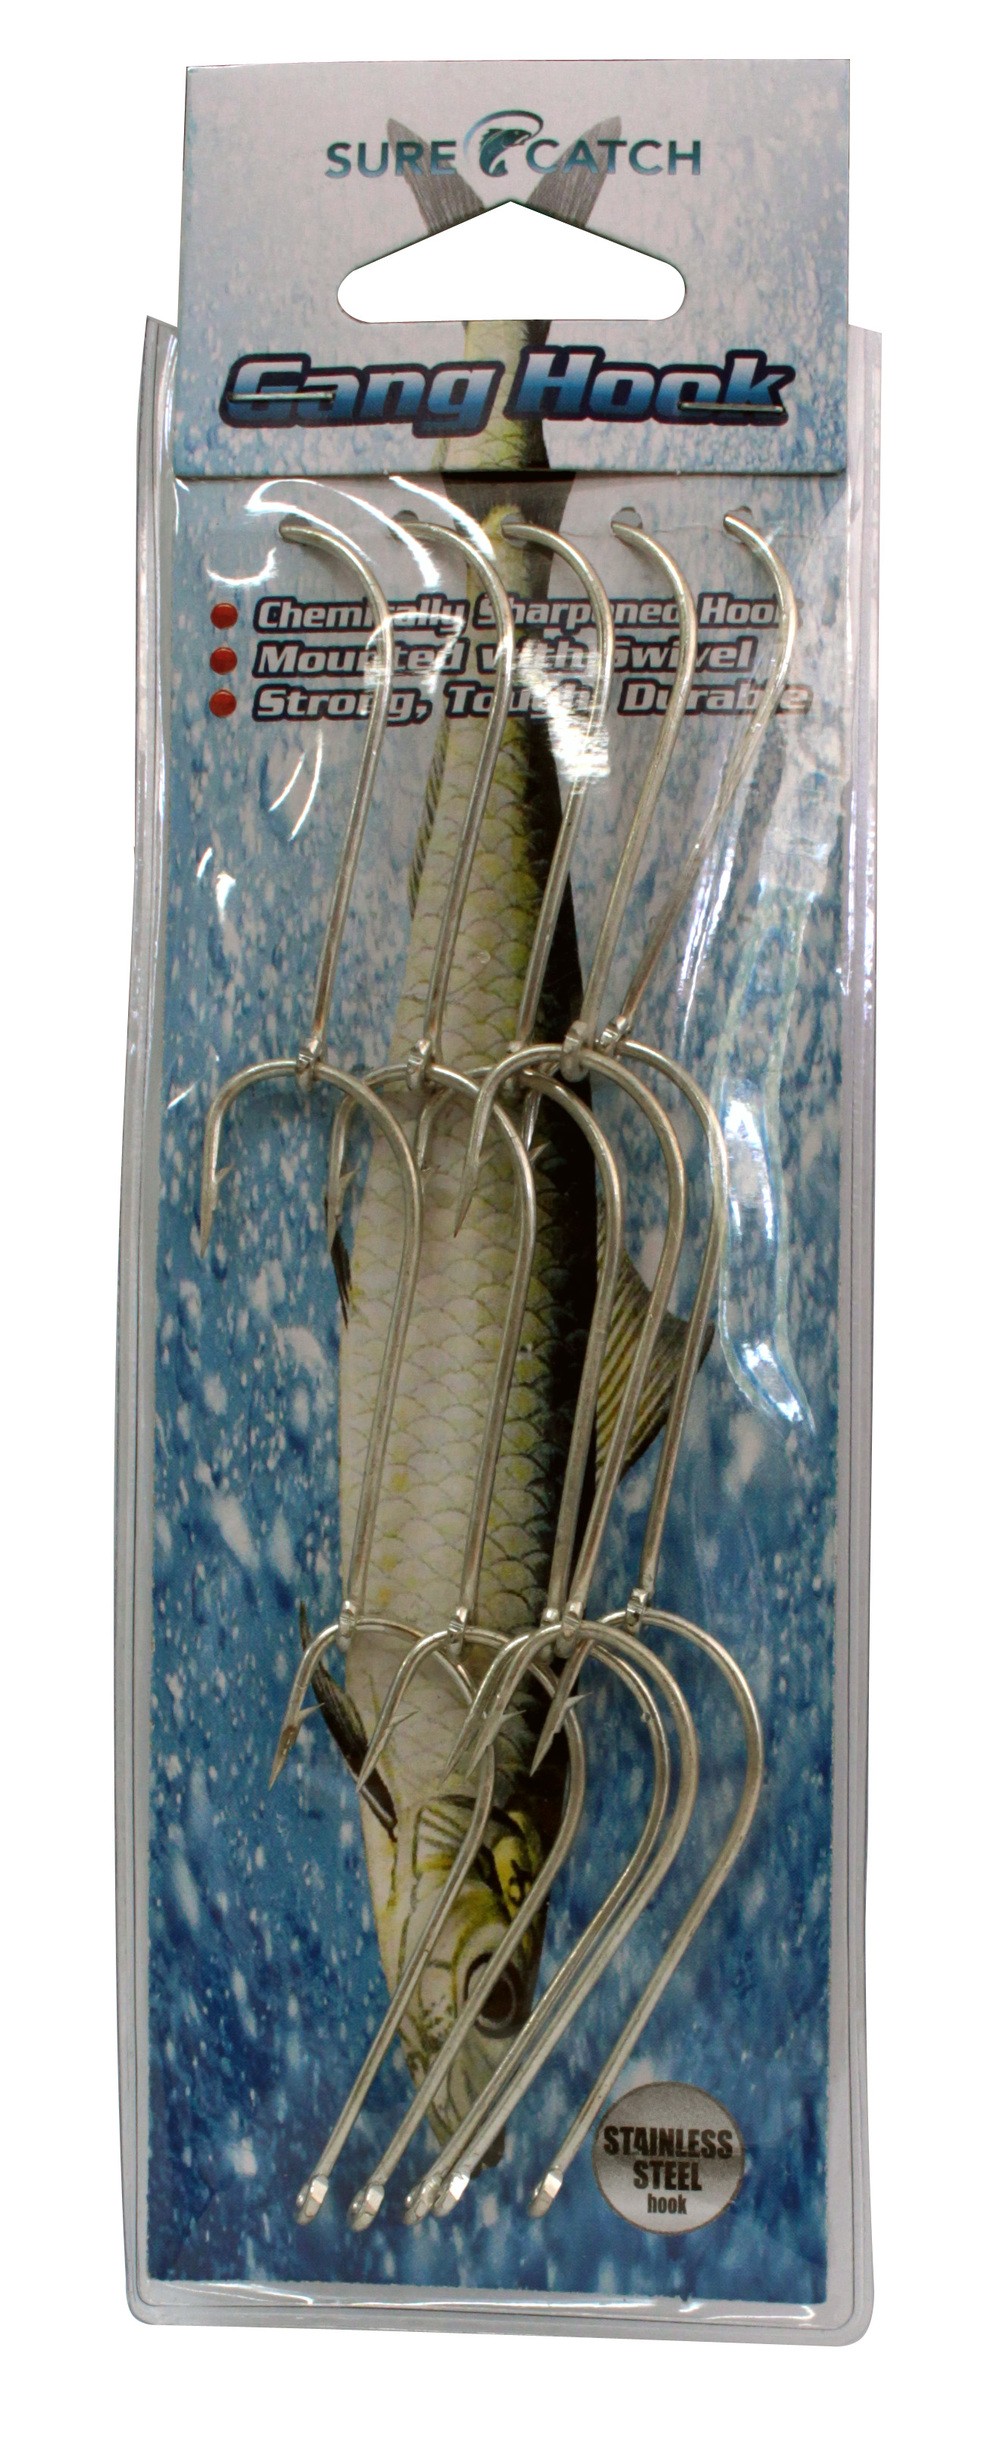 Sure Catch Chem/Sharp S/Steel Pre-rigged Ganged Hooks (Pack of 5 rigs) - Size 1/0